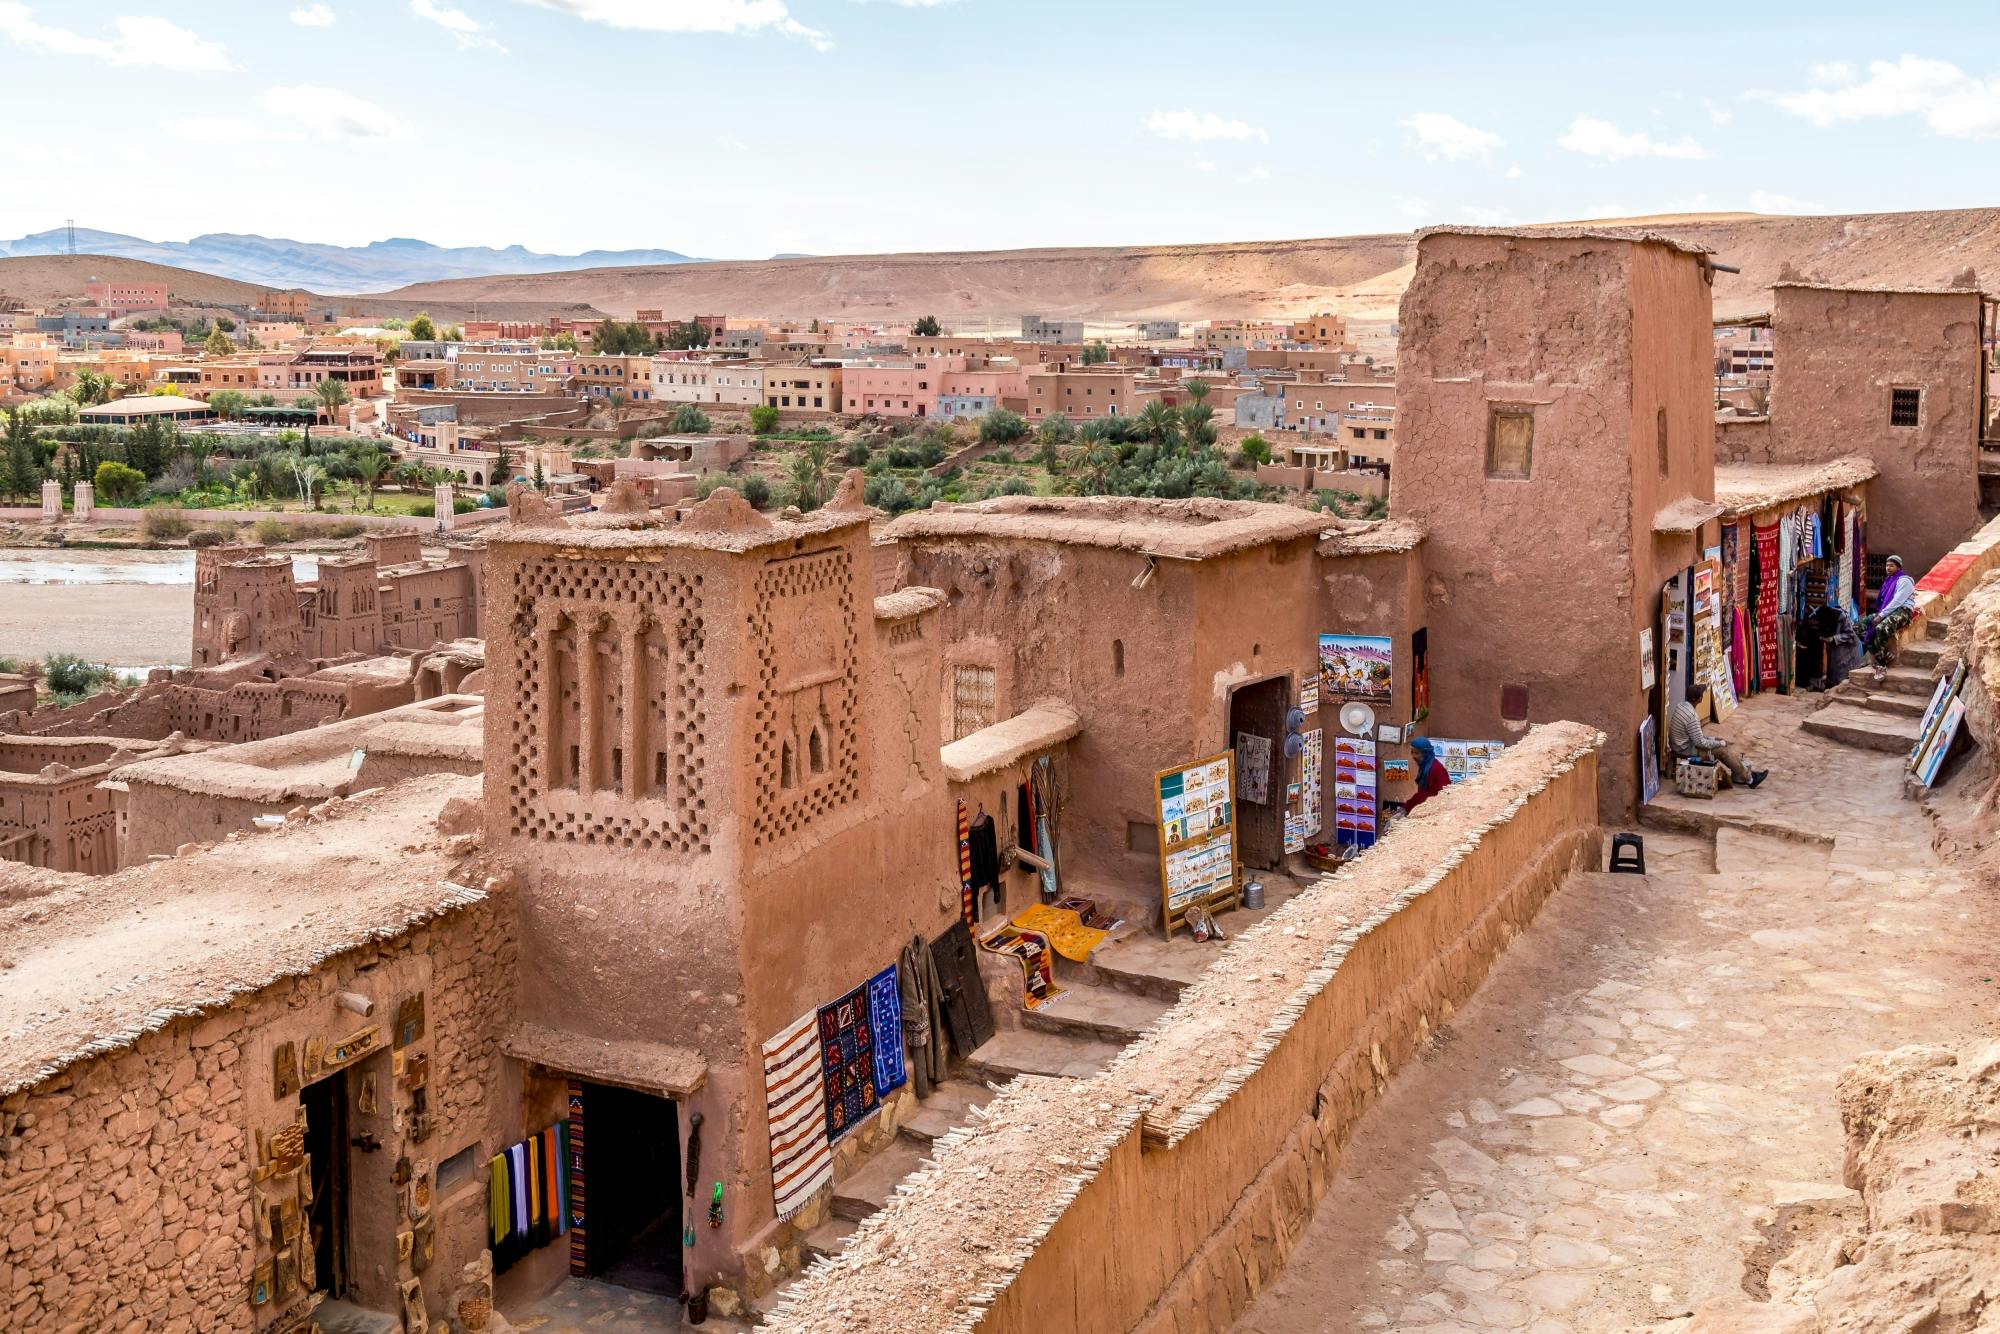 Road of the Kasbahs 4x4 Tour with Lunch in Aït Benhaddou